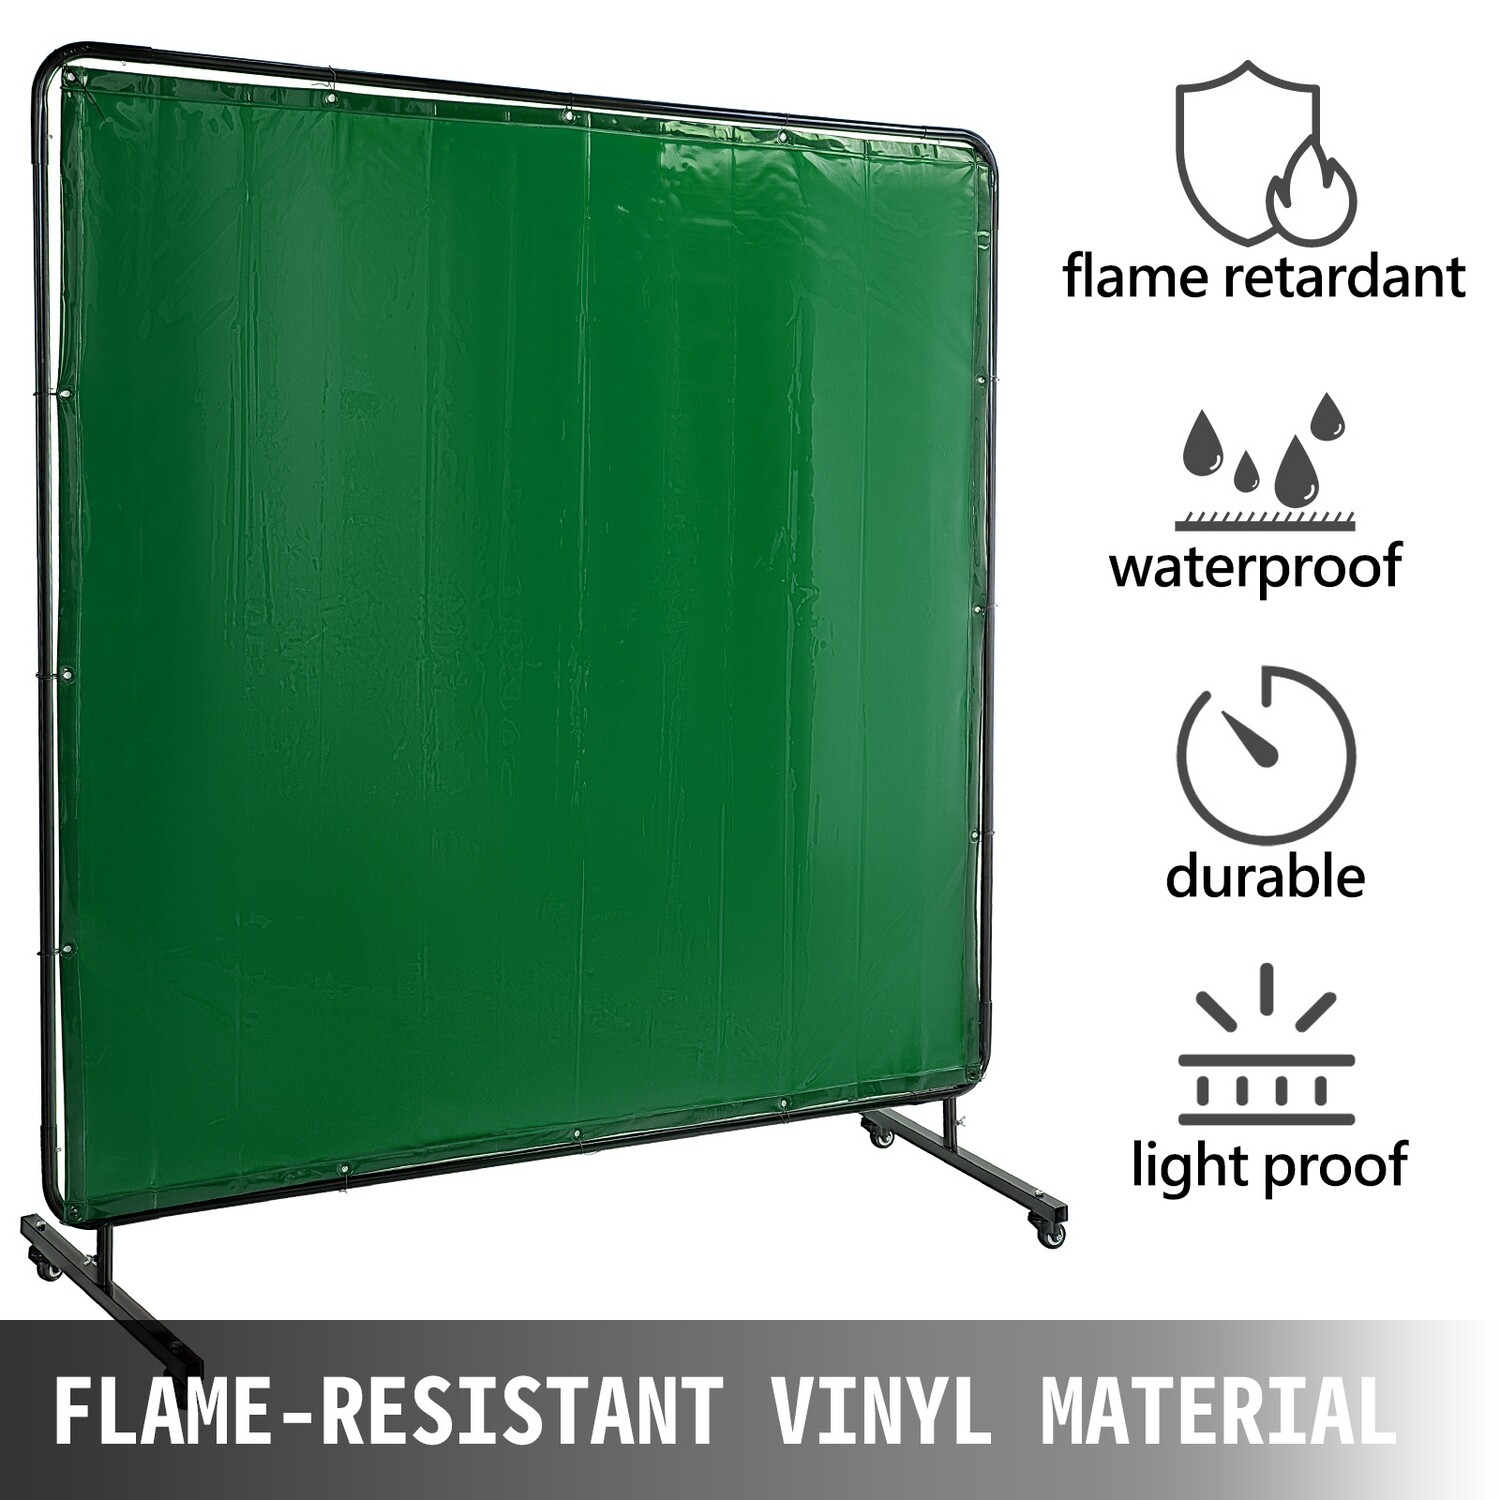 Welding curtain flame-resistant vinyl 6' x 6' welding screen with frame and wheels